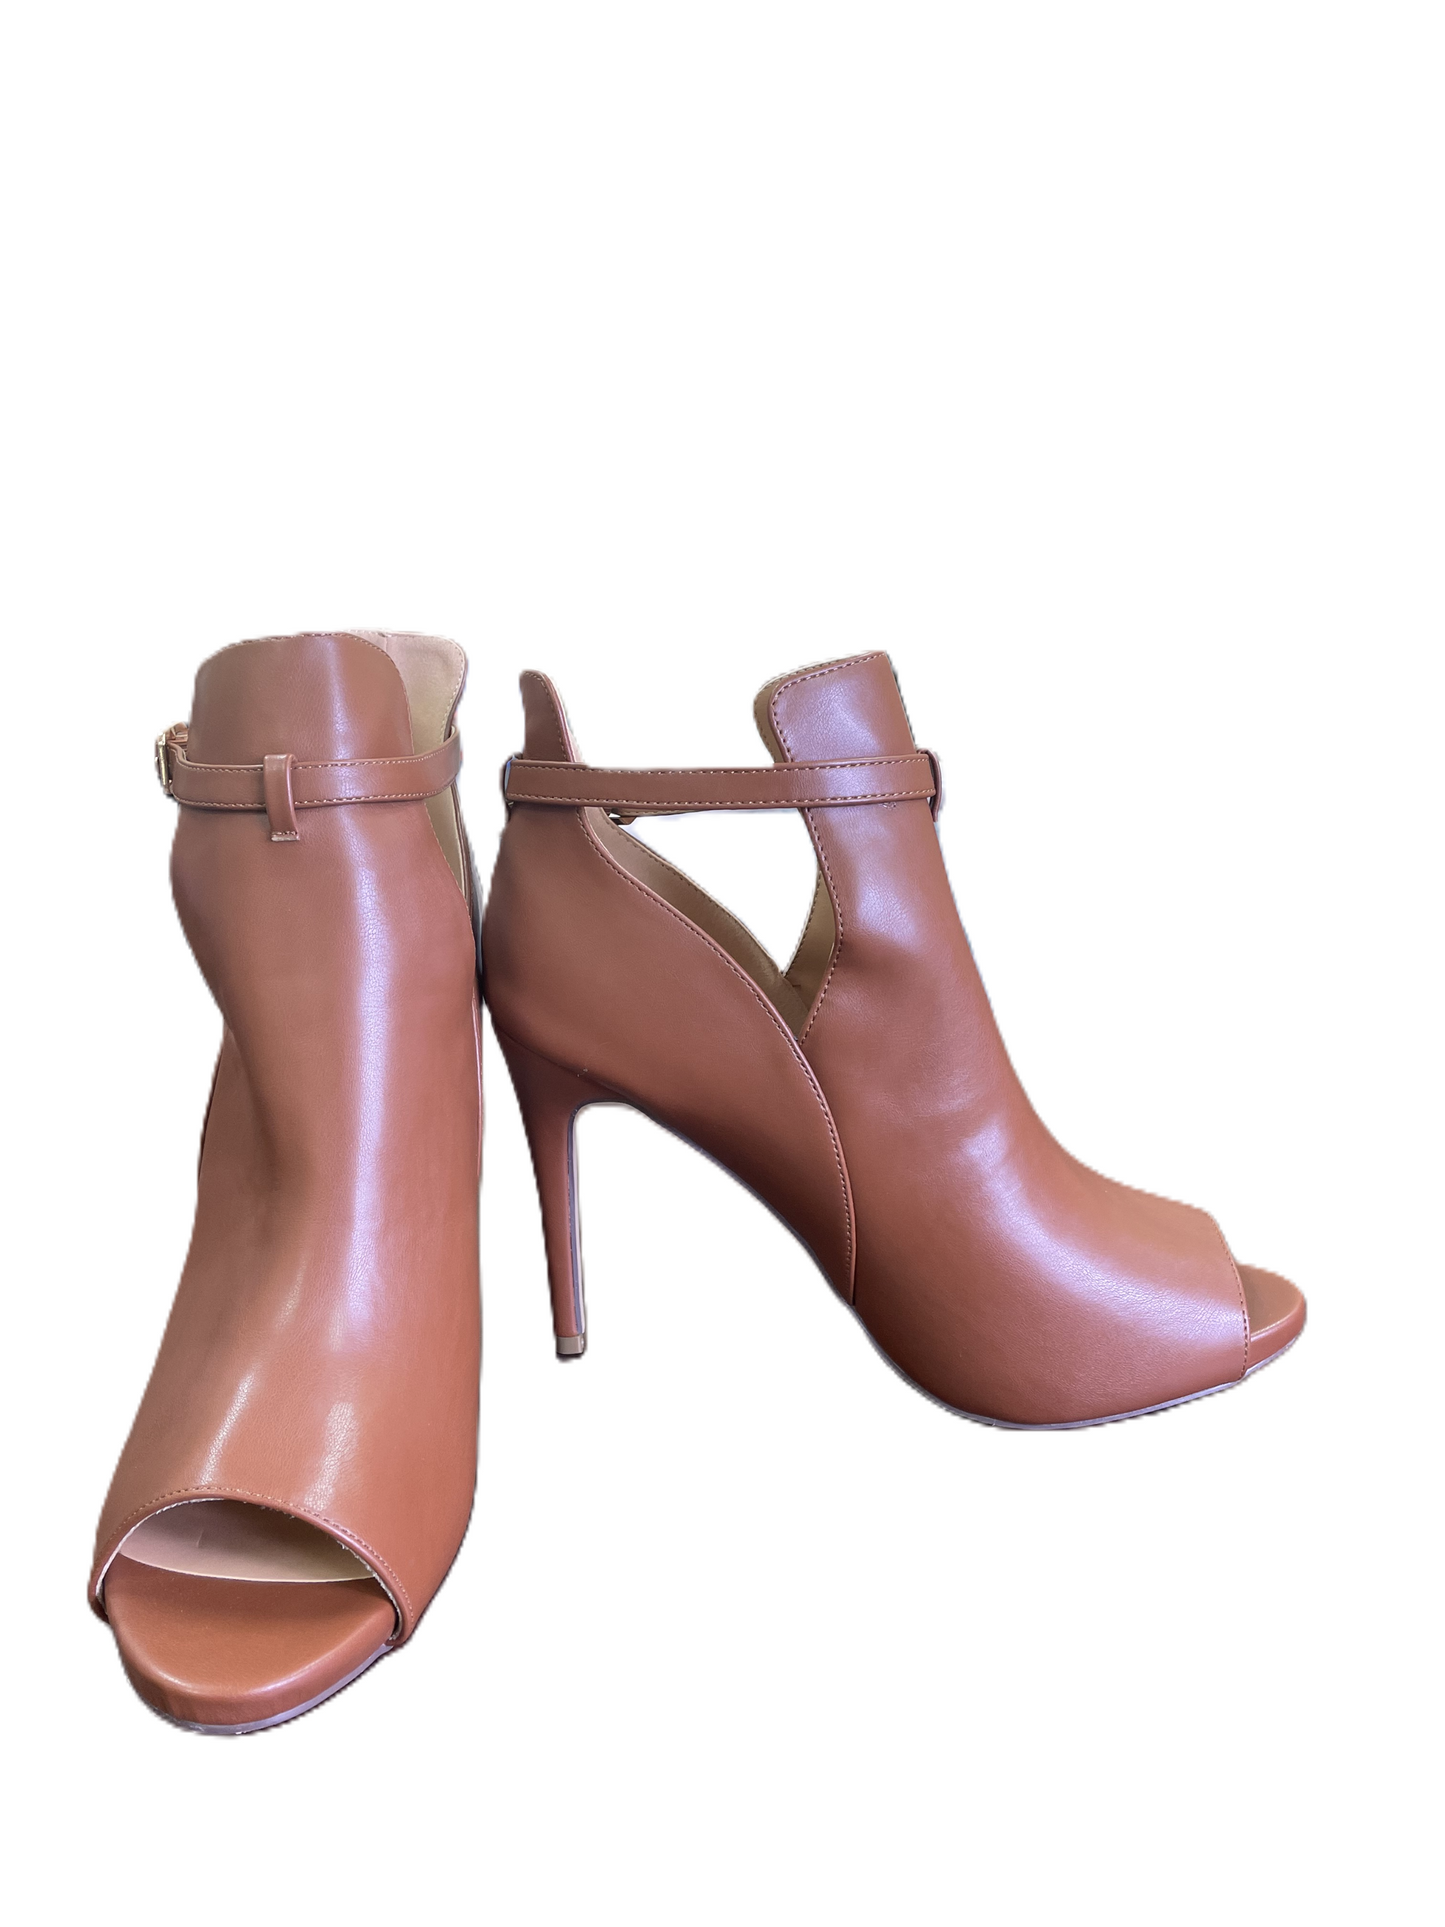 Boots Mid-calf Heels By Jessica Simpson  Size: 11